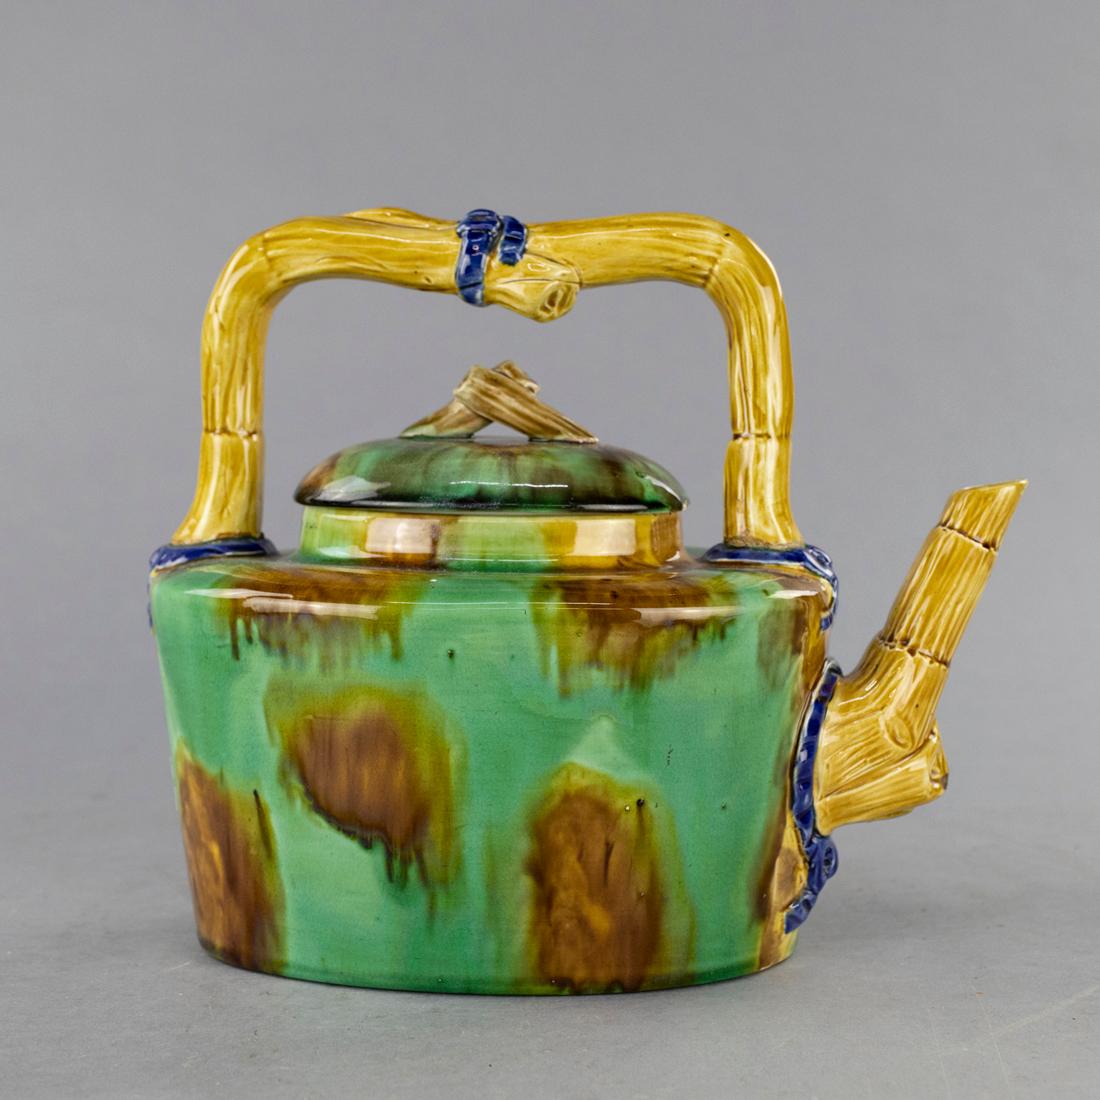 An antique Japanese Aesthetic majolica pottery tea pot offers bamboo form handle and finial with drip glaze finish, marked on base illegible as photographed, c1910

Measures: 10